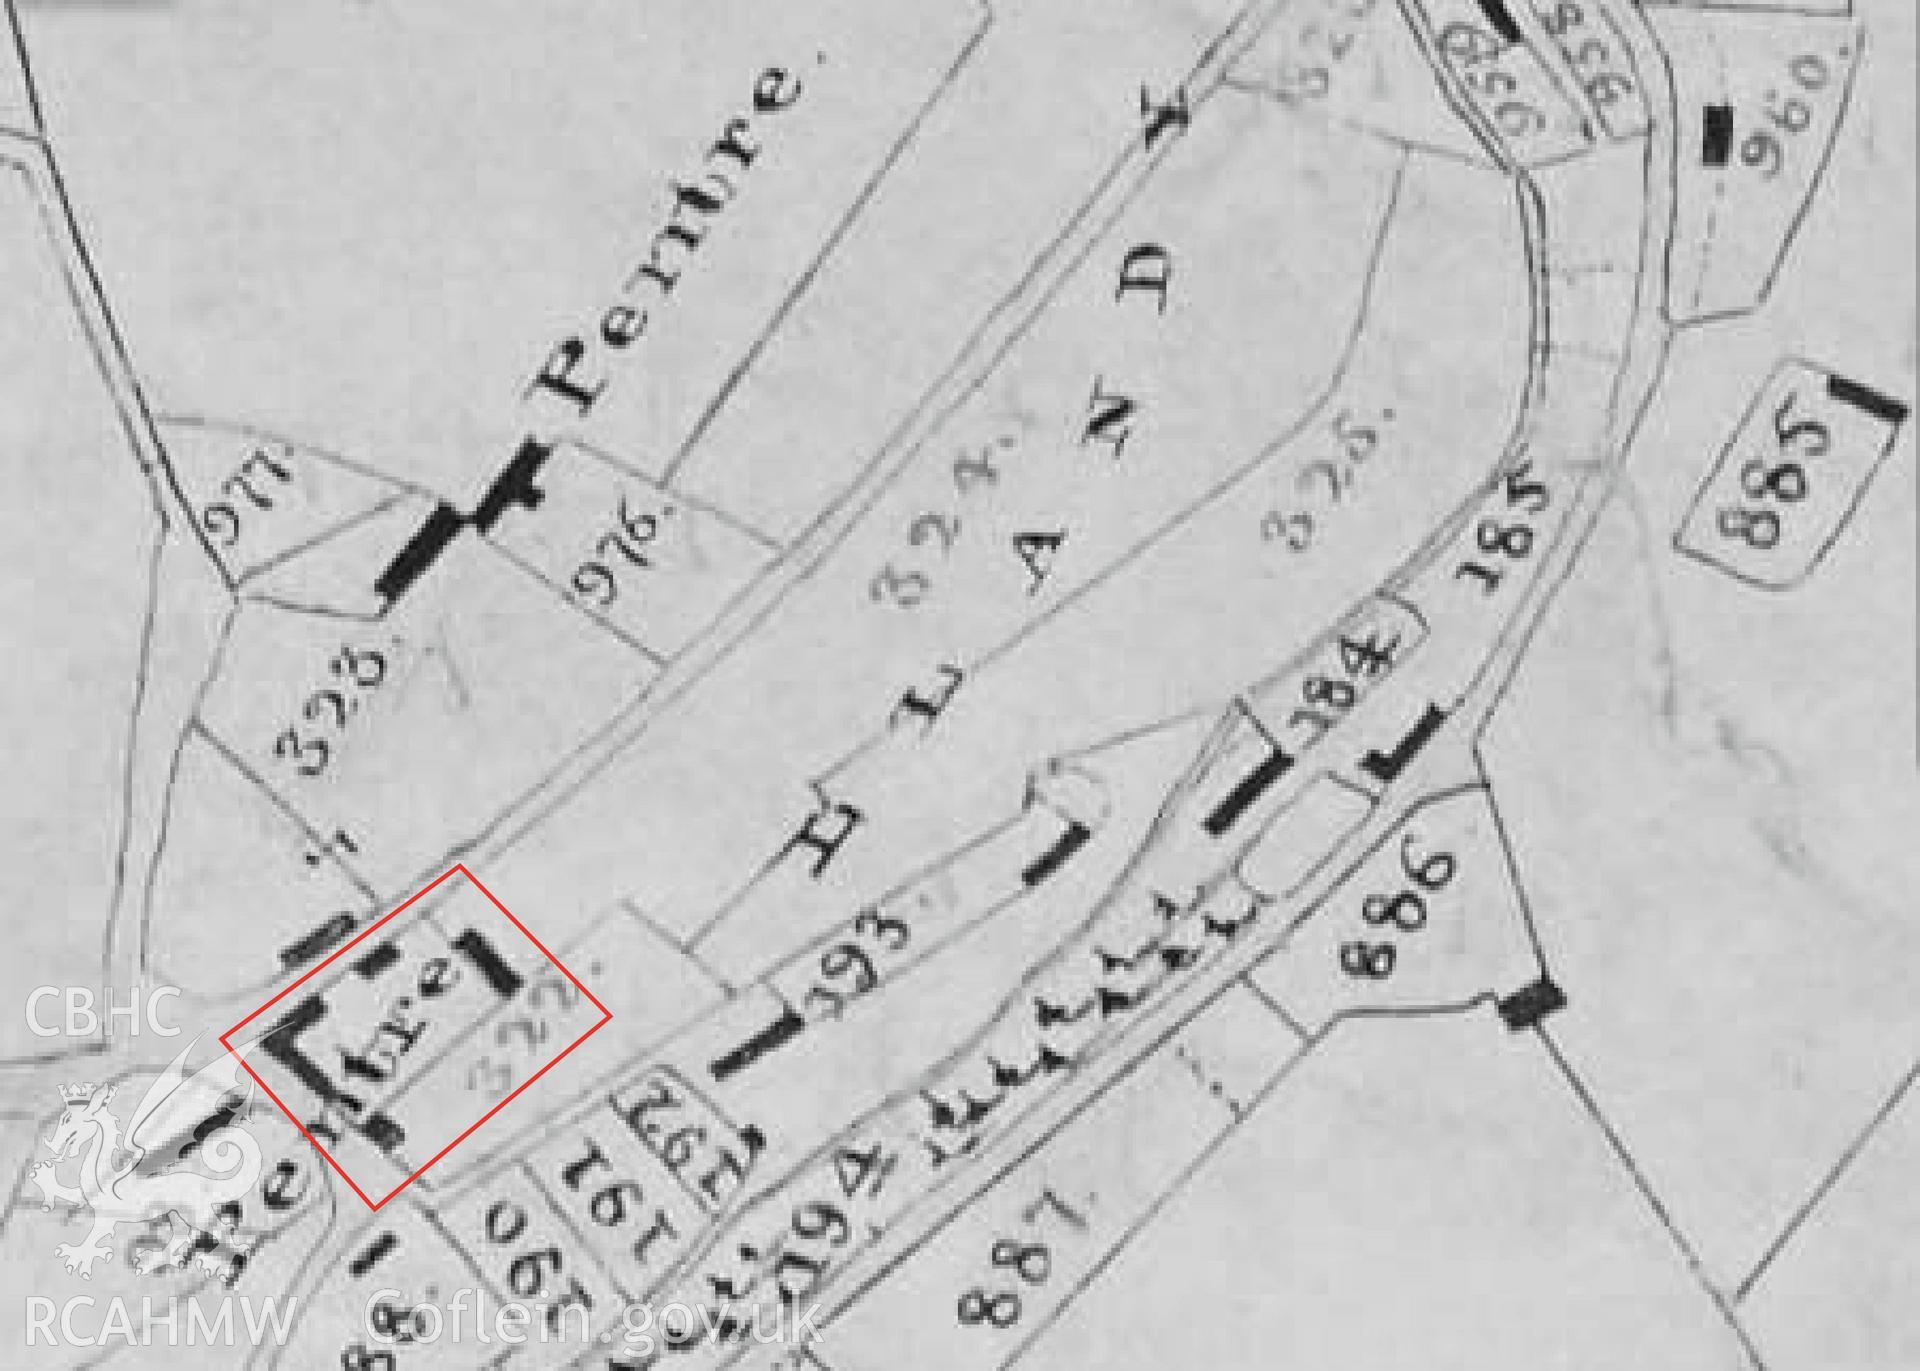 Tithe map showing Pentre Barns location used as report illustration for CPAT Project 2414: Pentre Barns, Llandyssil, Powys - Building Survey. Prepared by Kate Pack of Clwyd Powys Archaeological Trust, 2019. Report no. 1694.